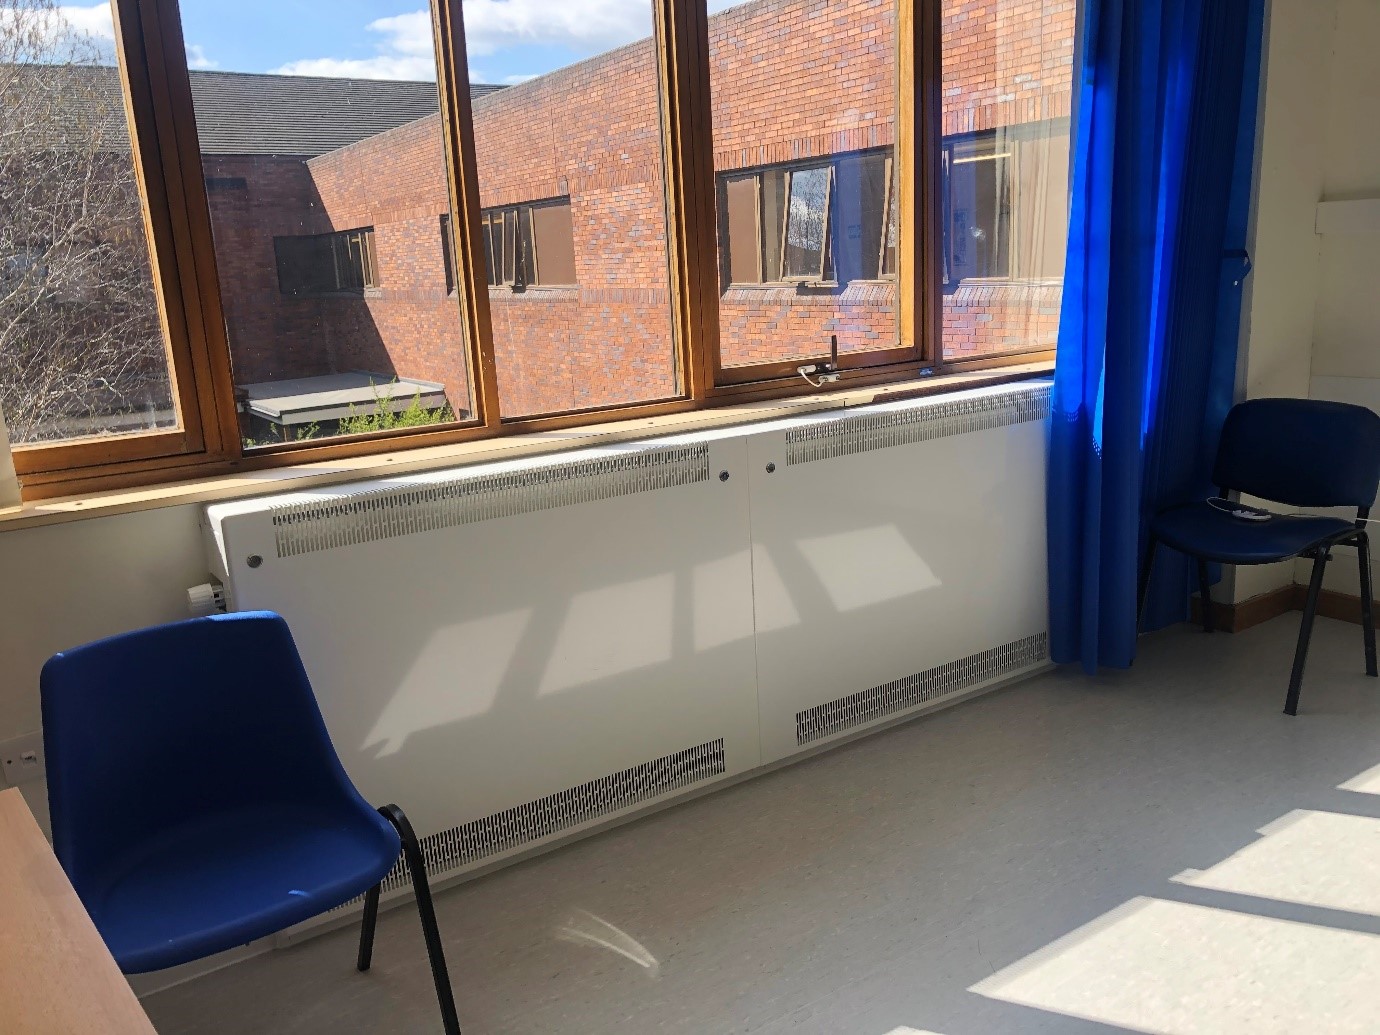 Over 800 LST Radiator Covers For 3 Hospitals